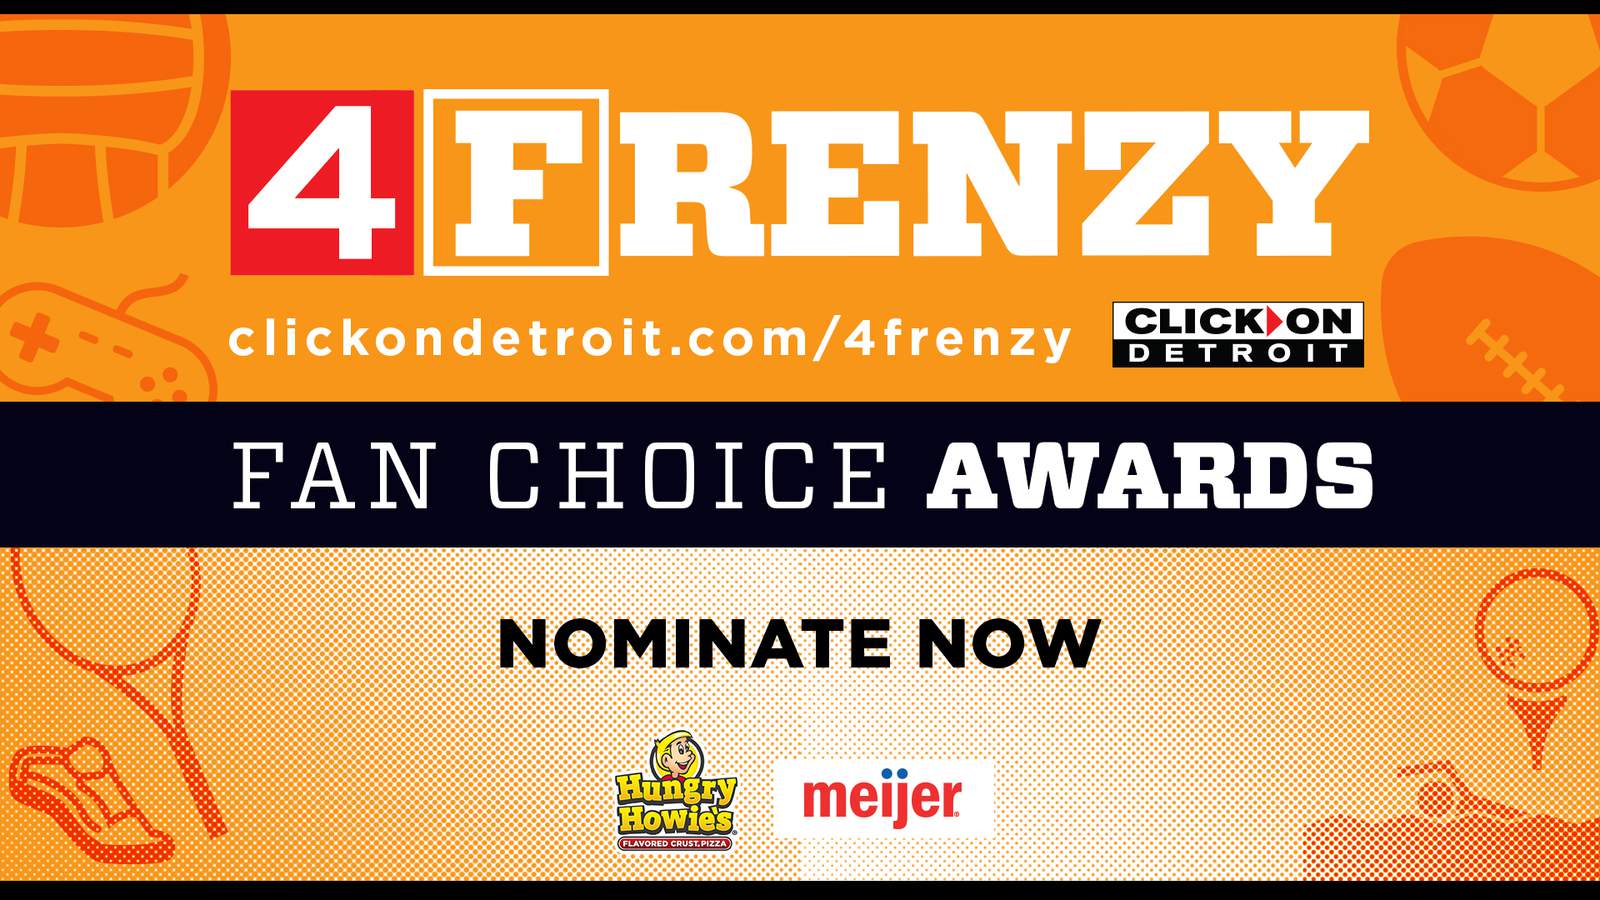 Just 5 days left to nominate for 4Frenzy Fan Choice Awards!